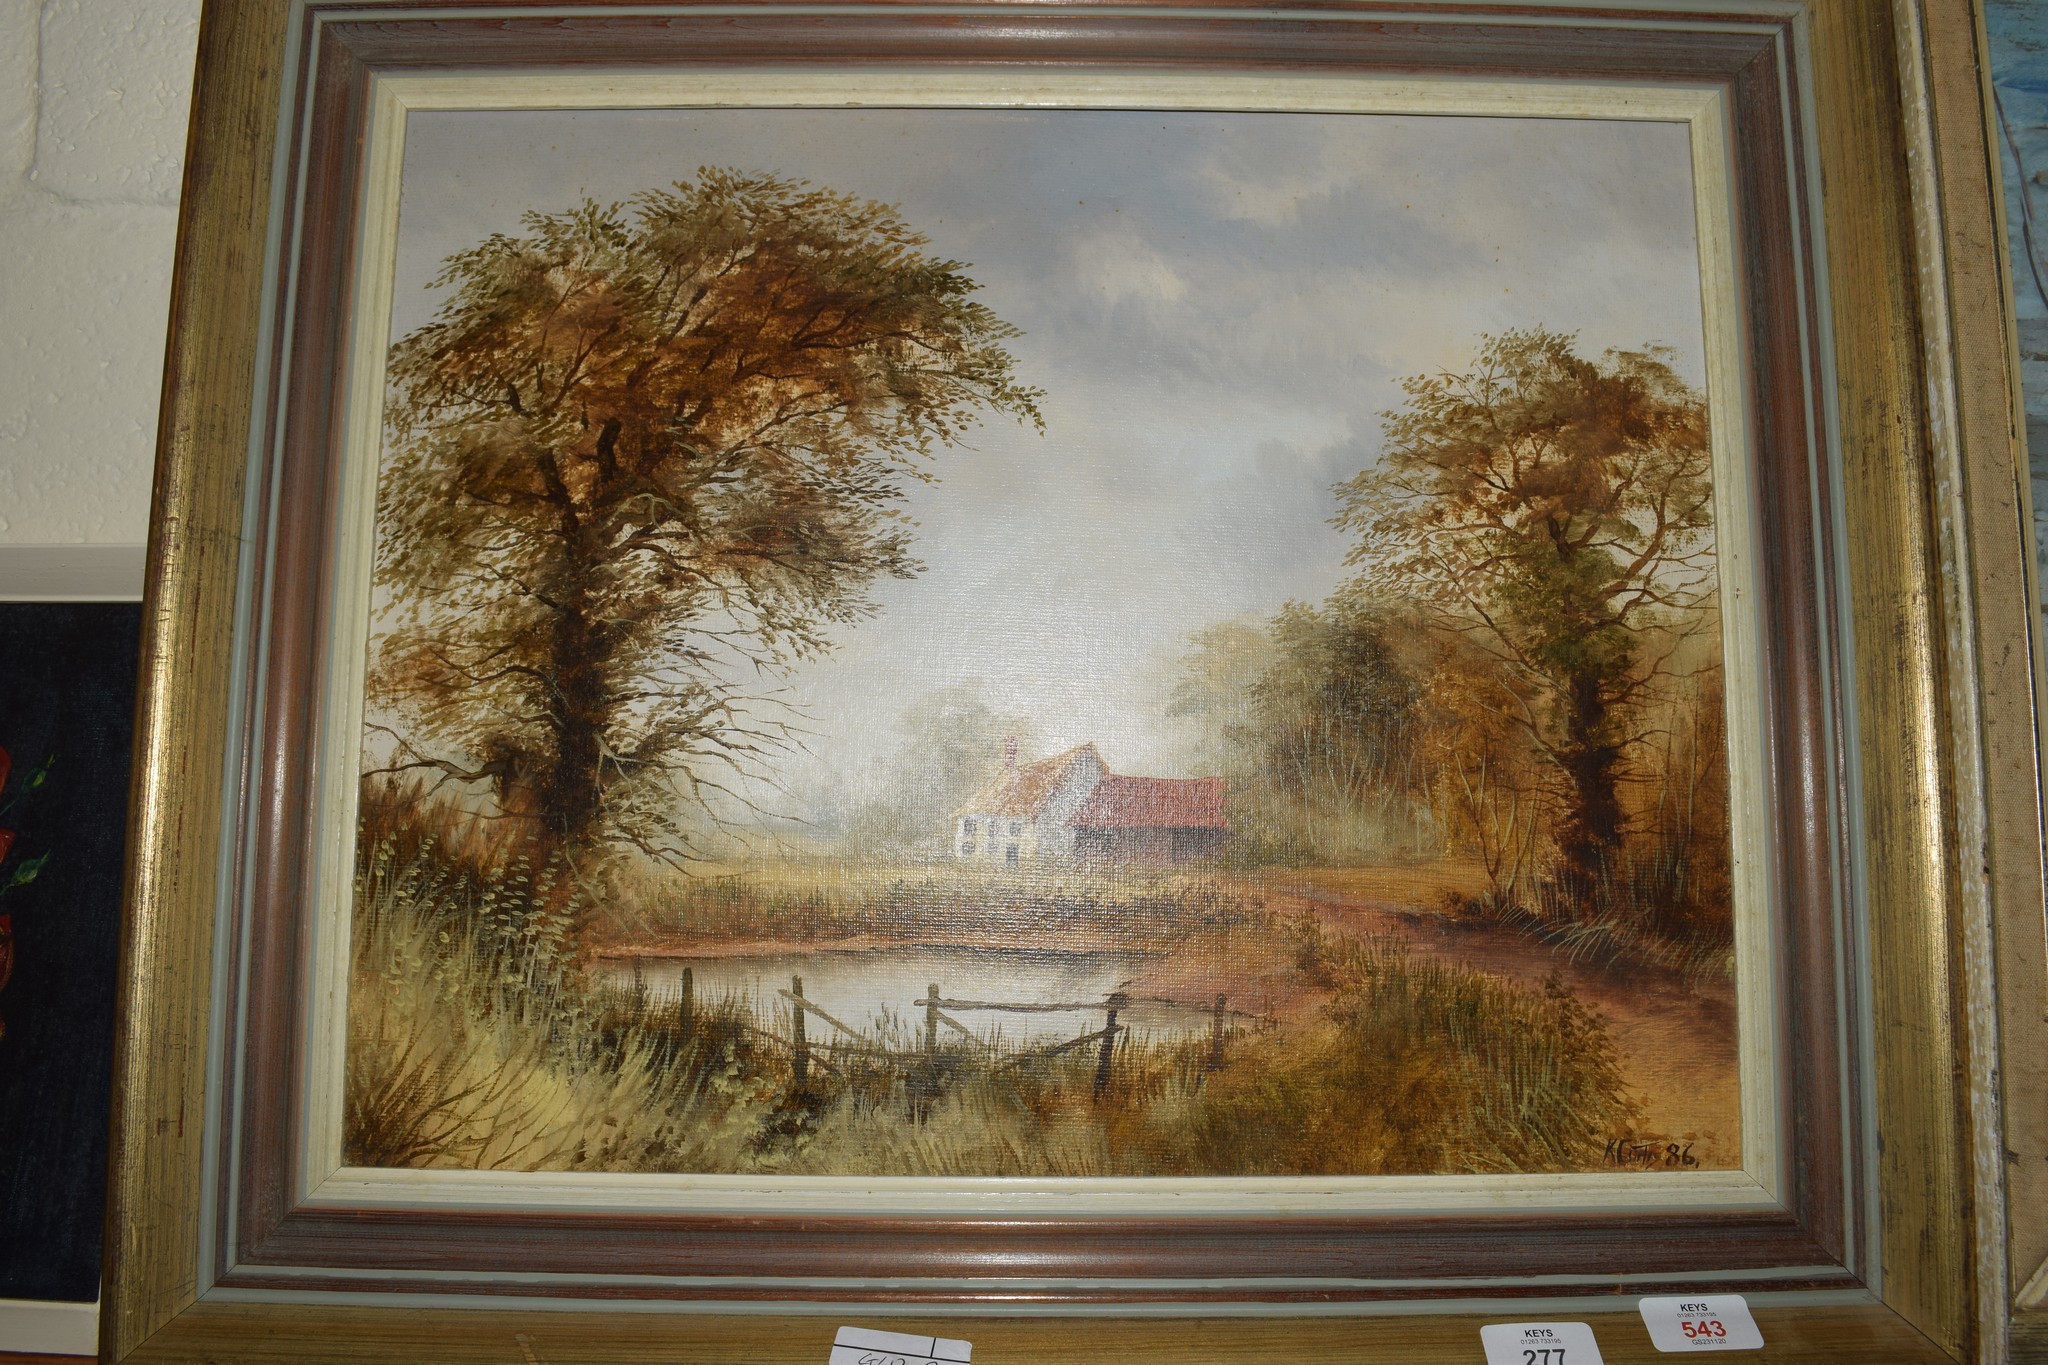 MODERN PICTURE OF A RURAL SCENE IN GILT FRAME